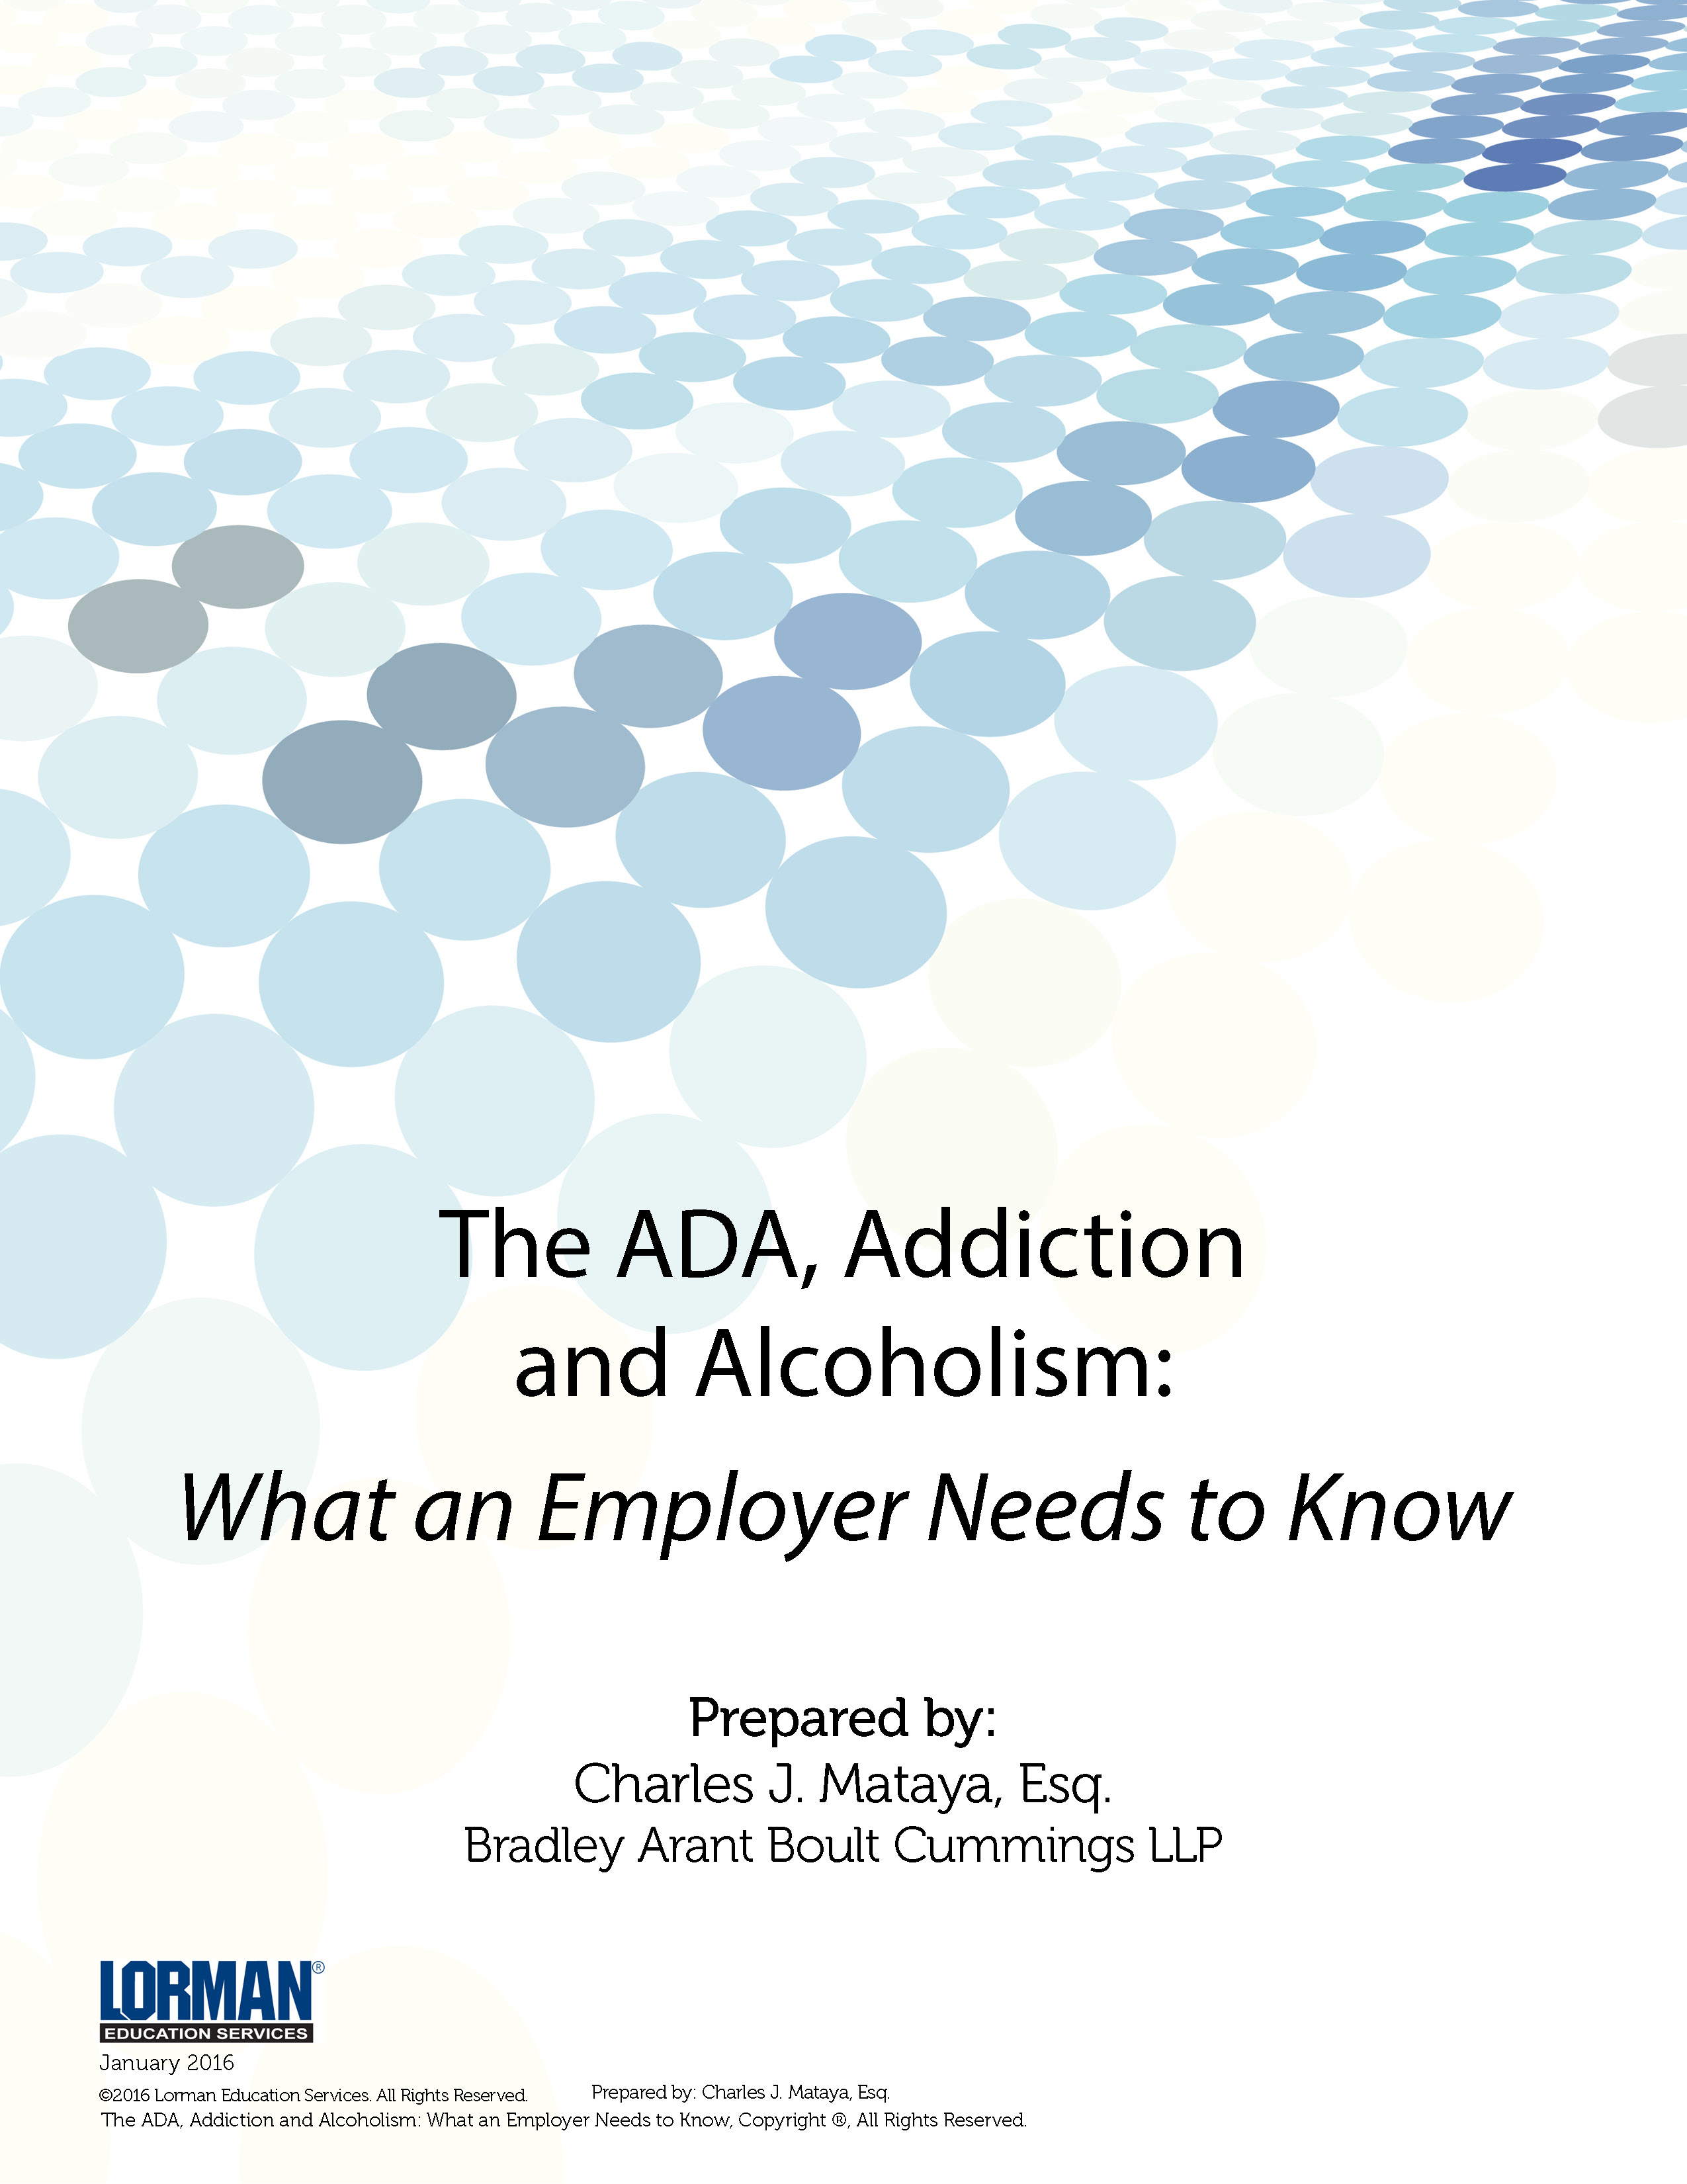 The ADA, Addiction and Alcoholism: What an Employer Needs to Know